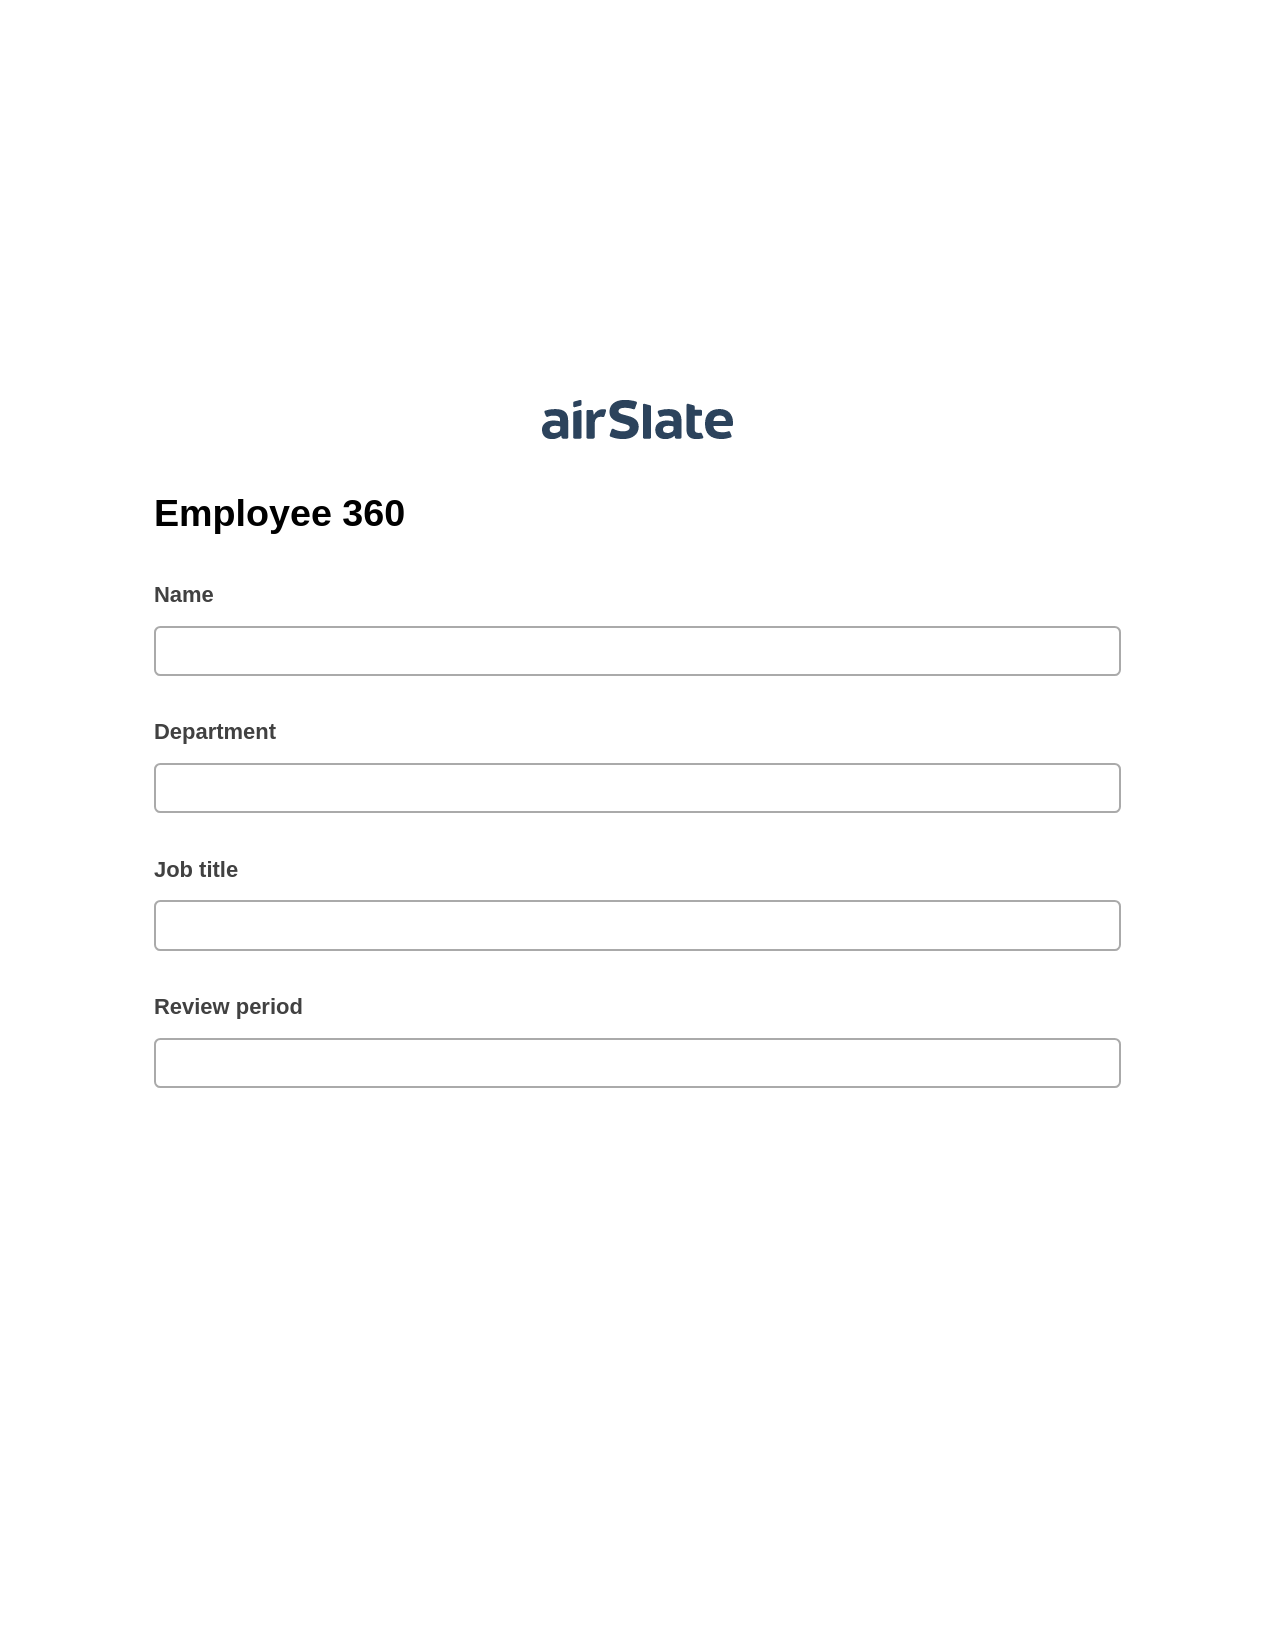 Multirole Employee 360 Pre-fill from MS Dynamics 365 Records, Reminder Bot, Export to Google Sheet Bot